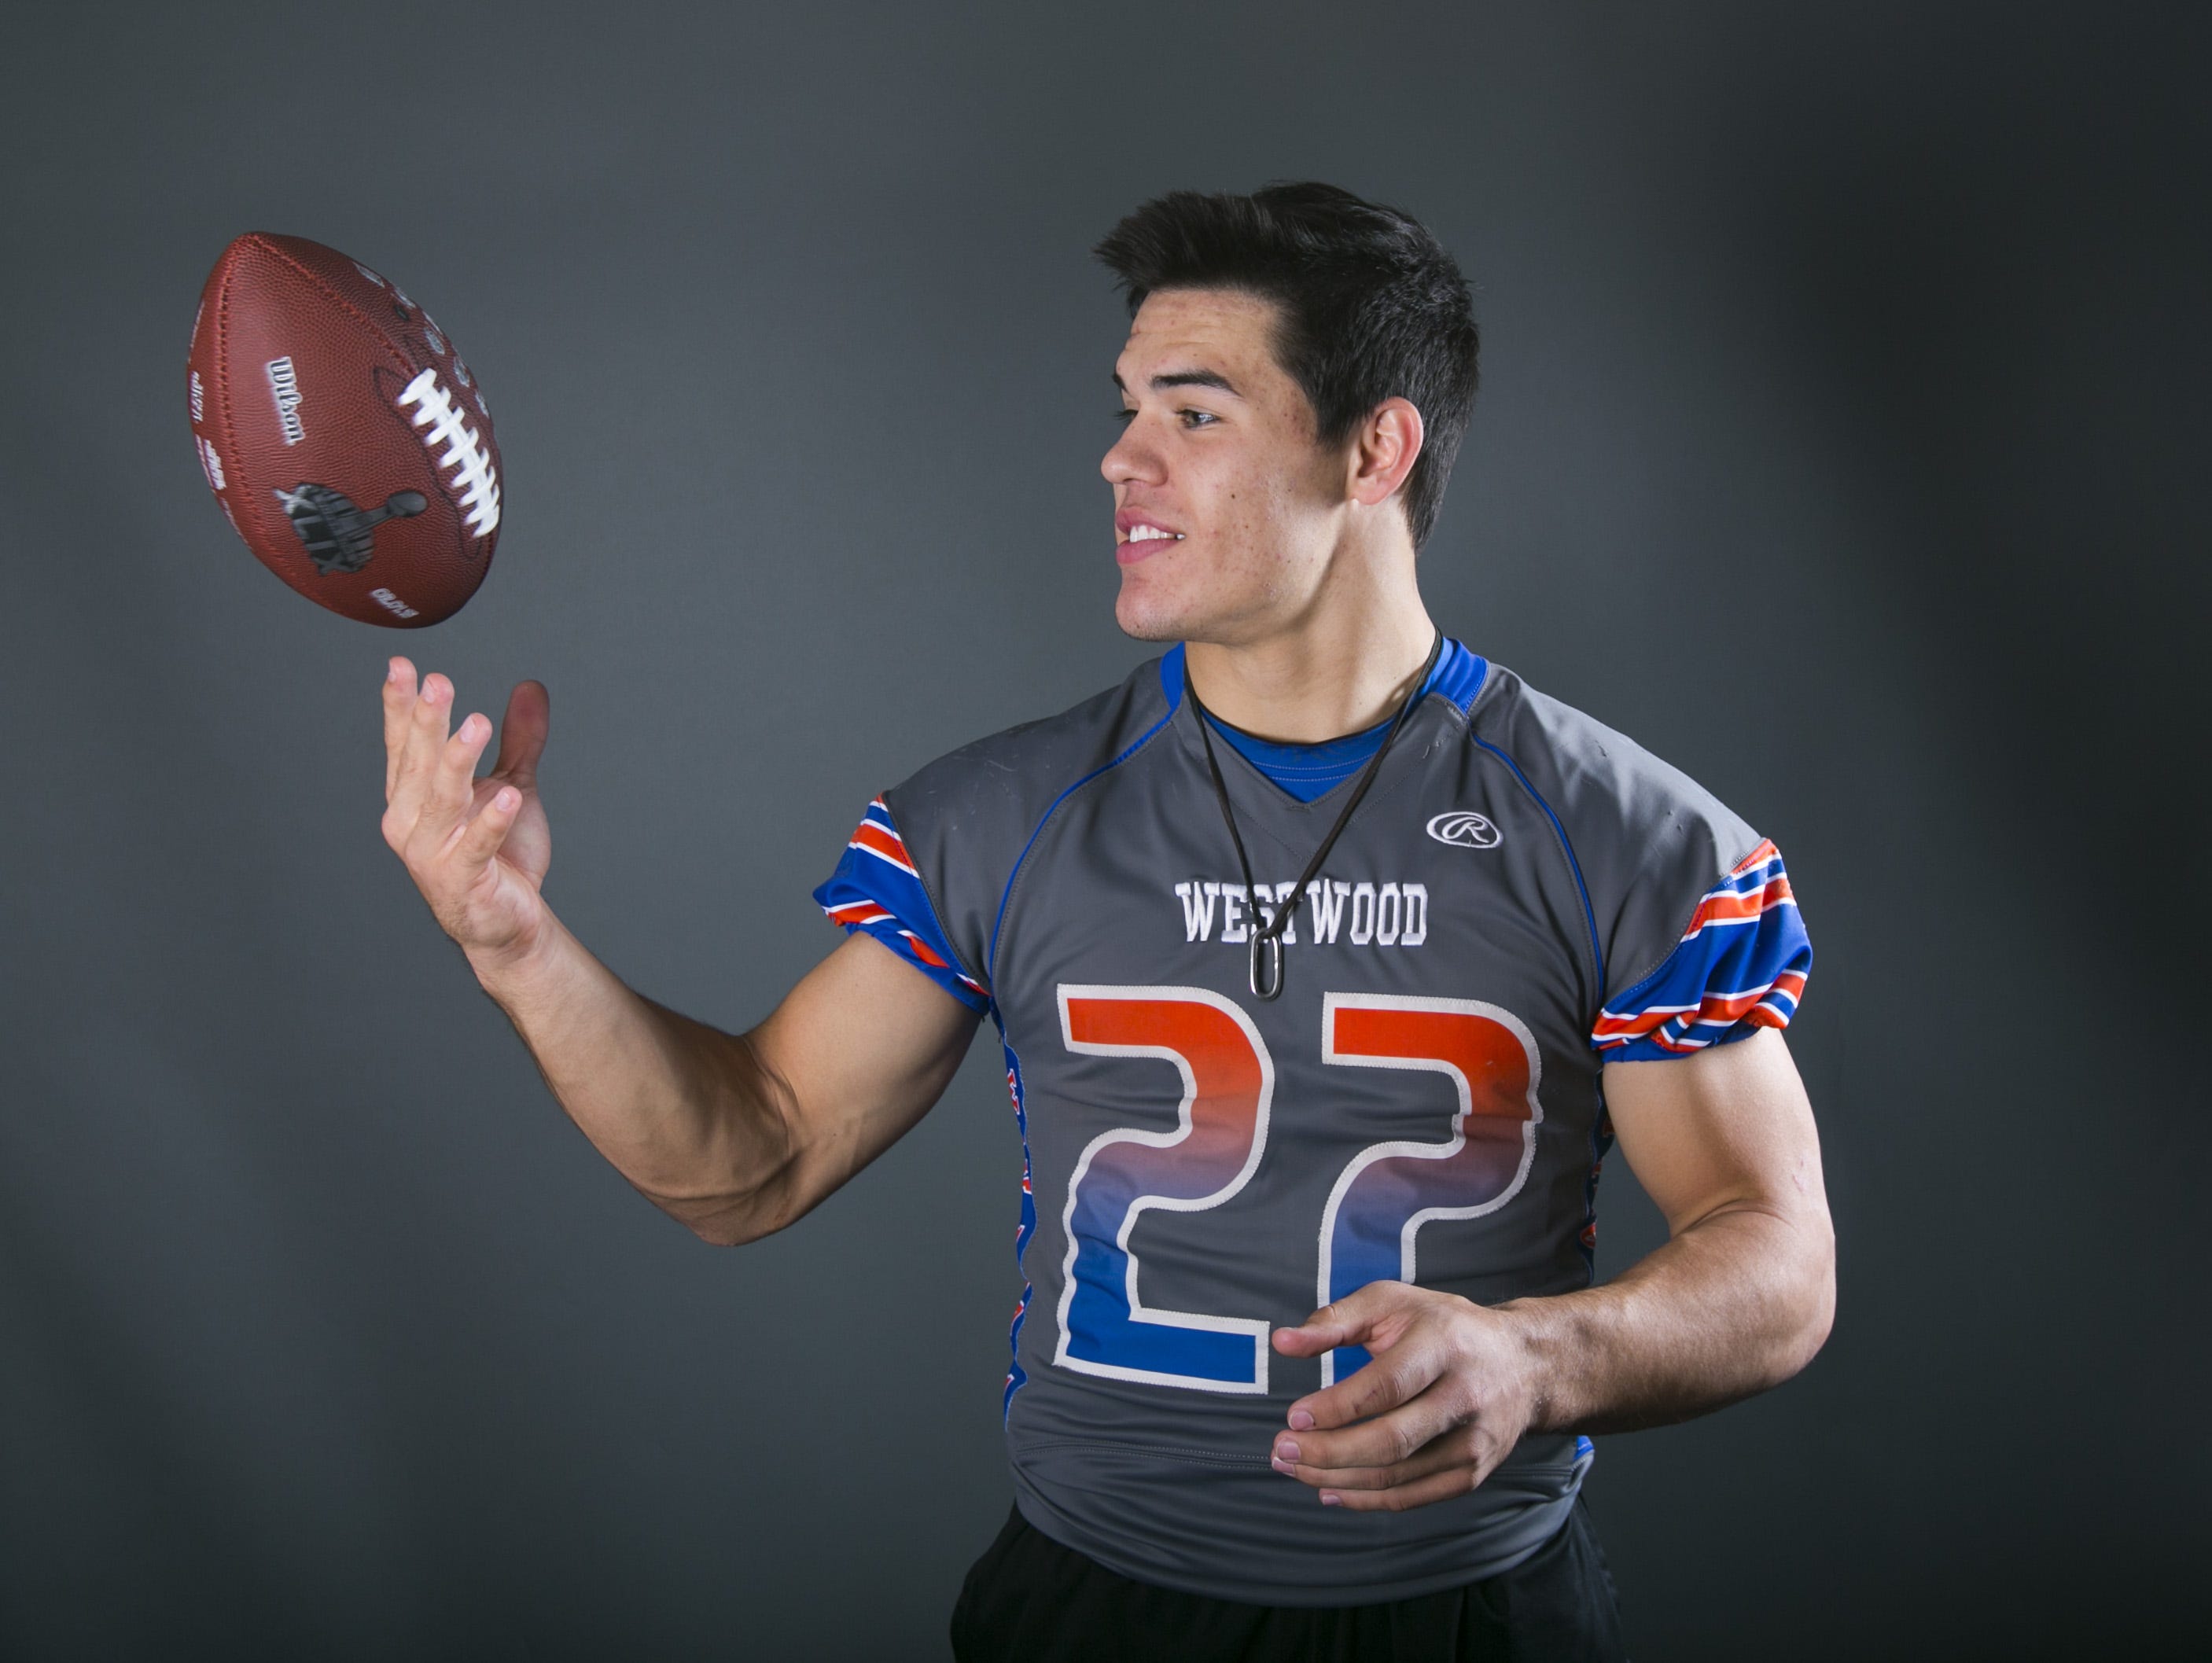 Mesa Westwood's running back Ethan Johnson is azcentral sports' runner-up October Athlete of the Month.